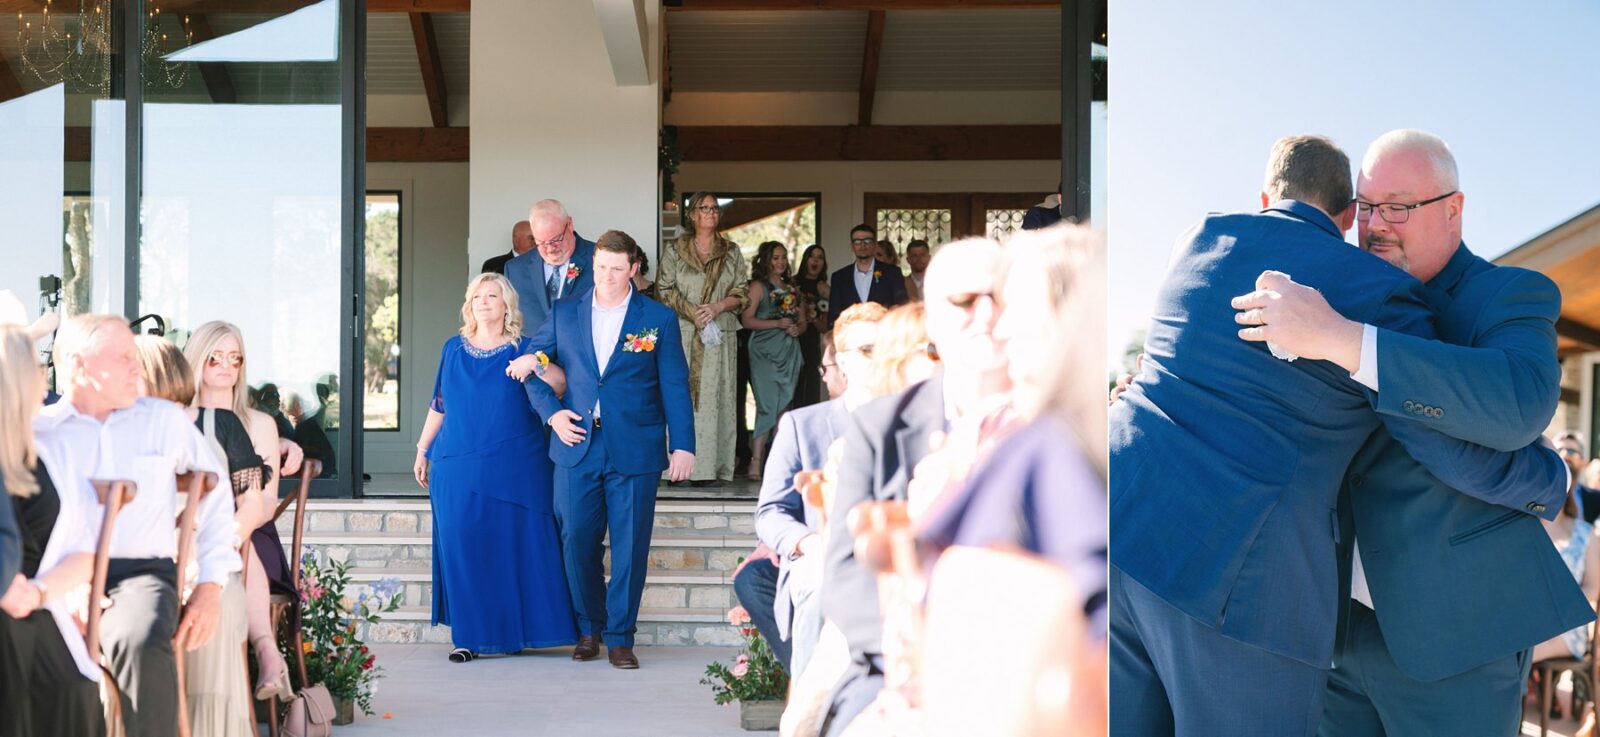 groom walking with mom and dad down the aisle, ceremony space, wedding at the videre estate venue, wimberley, photos by Tara Lyons Photography, Perry's Petal, planning by sweet magnolia events